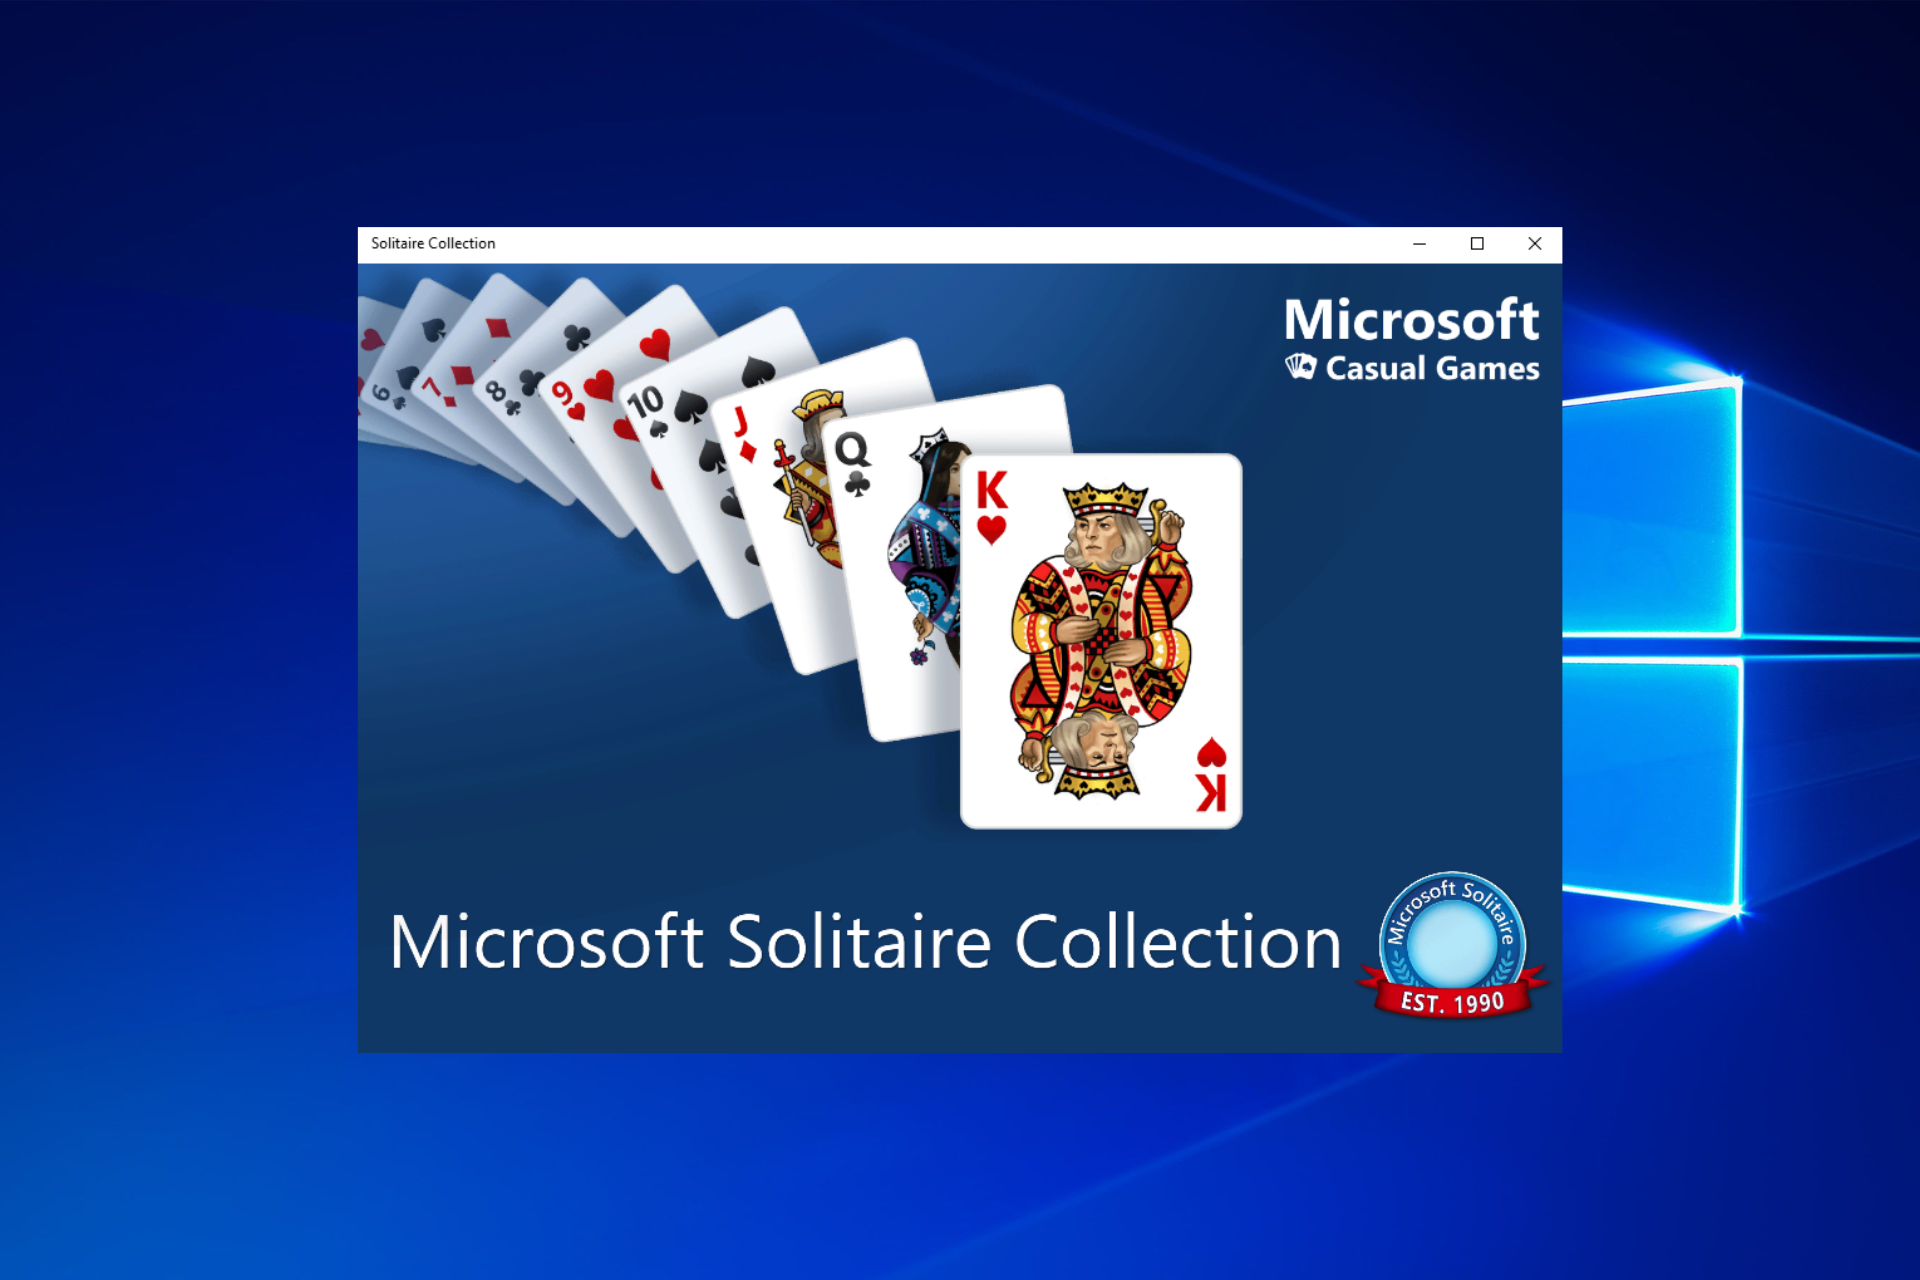 Microsoft Solitaire Collection keeps getting worse : r/assholedesign